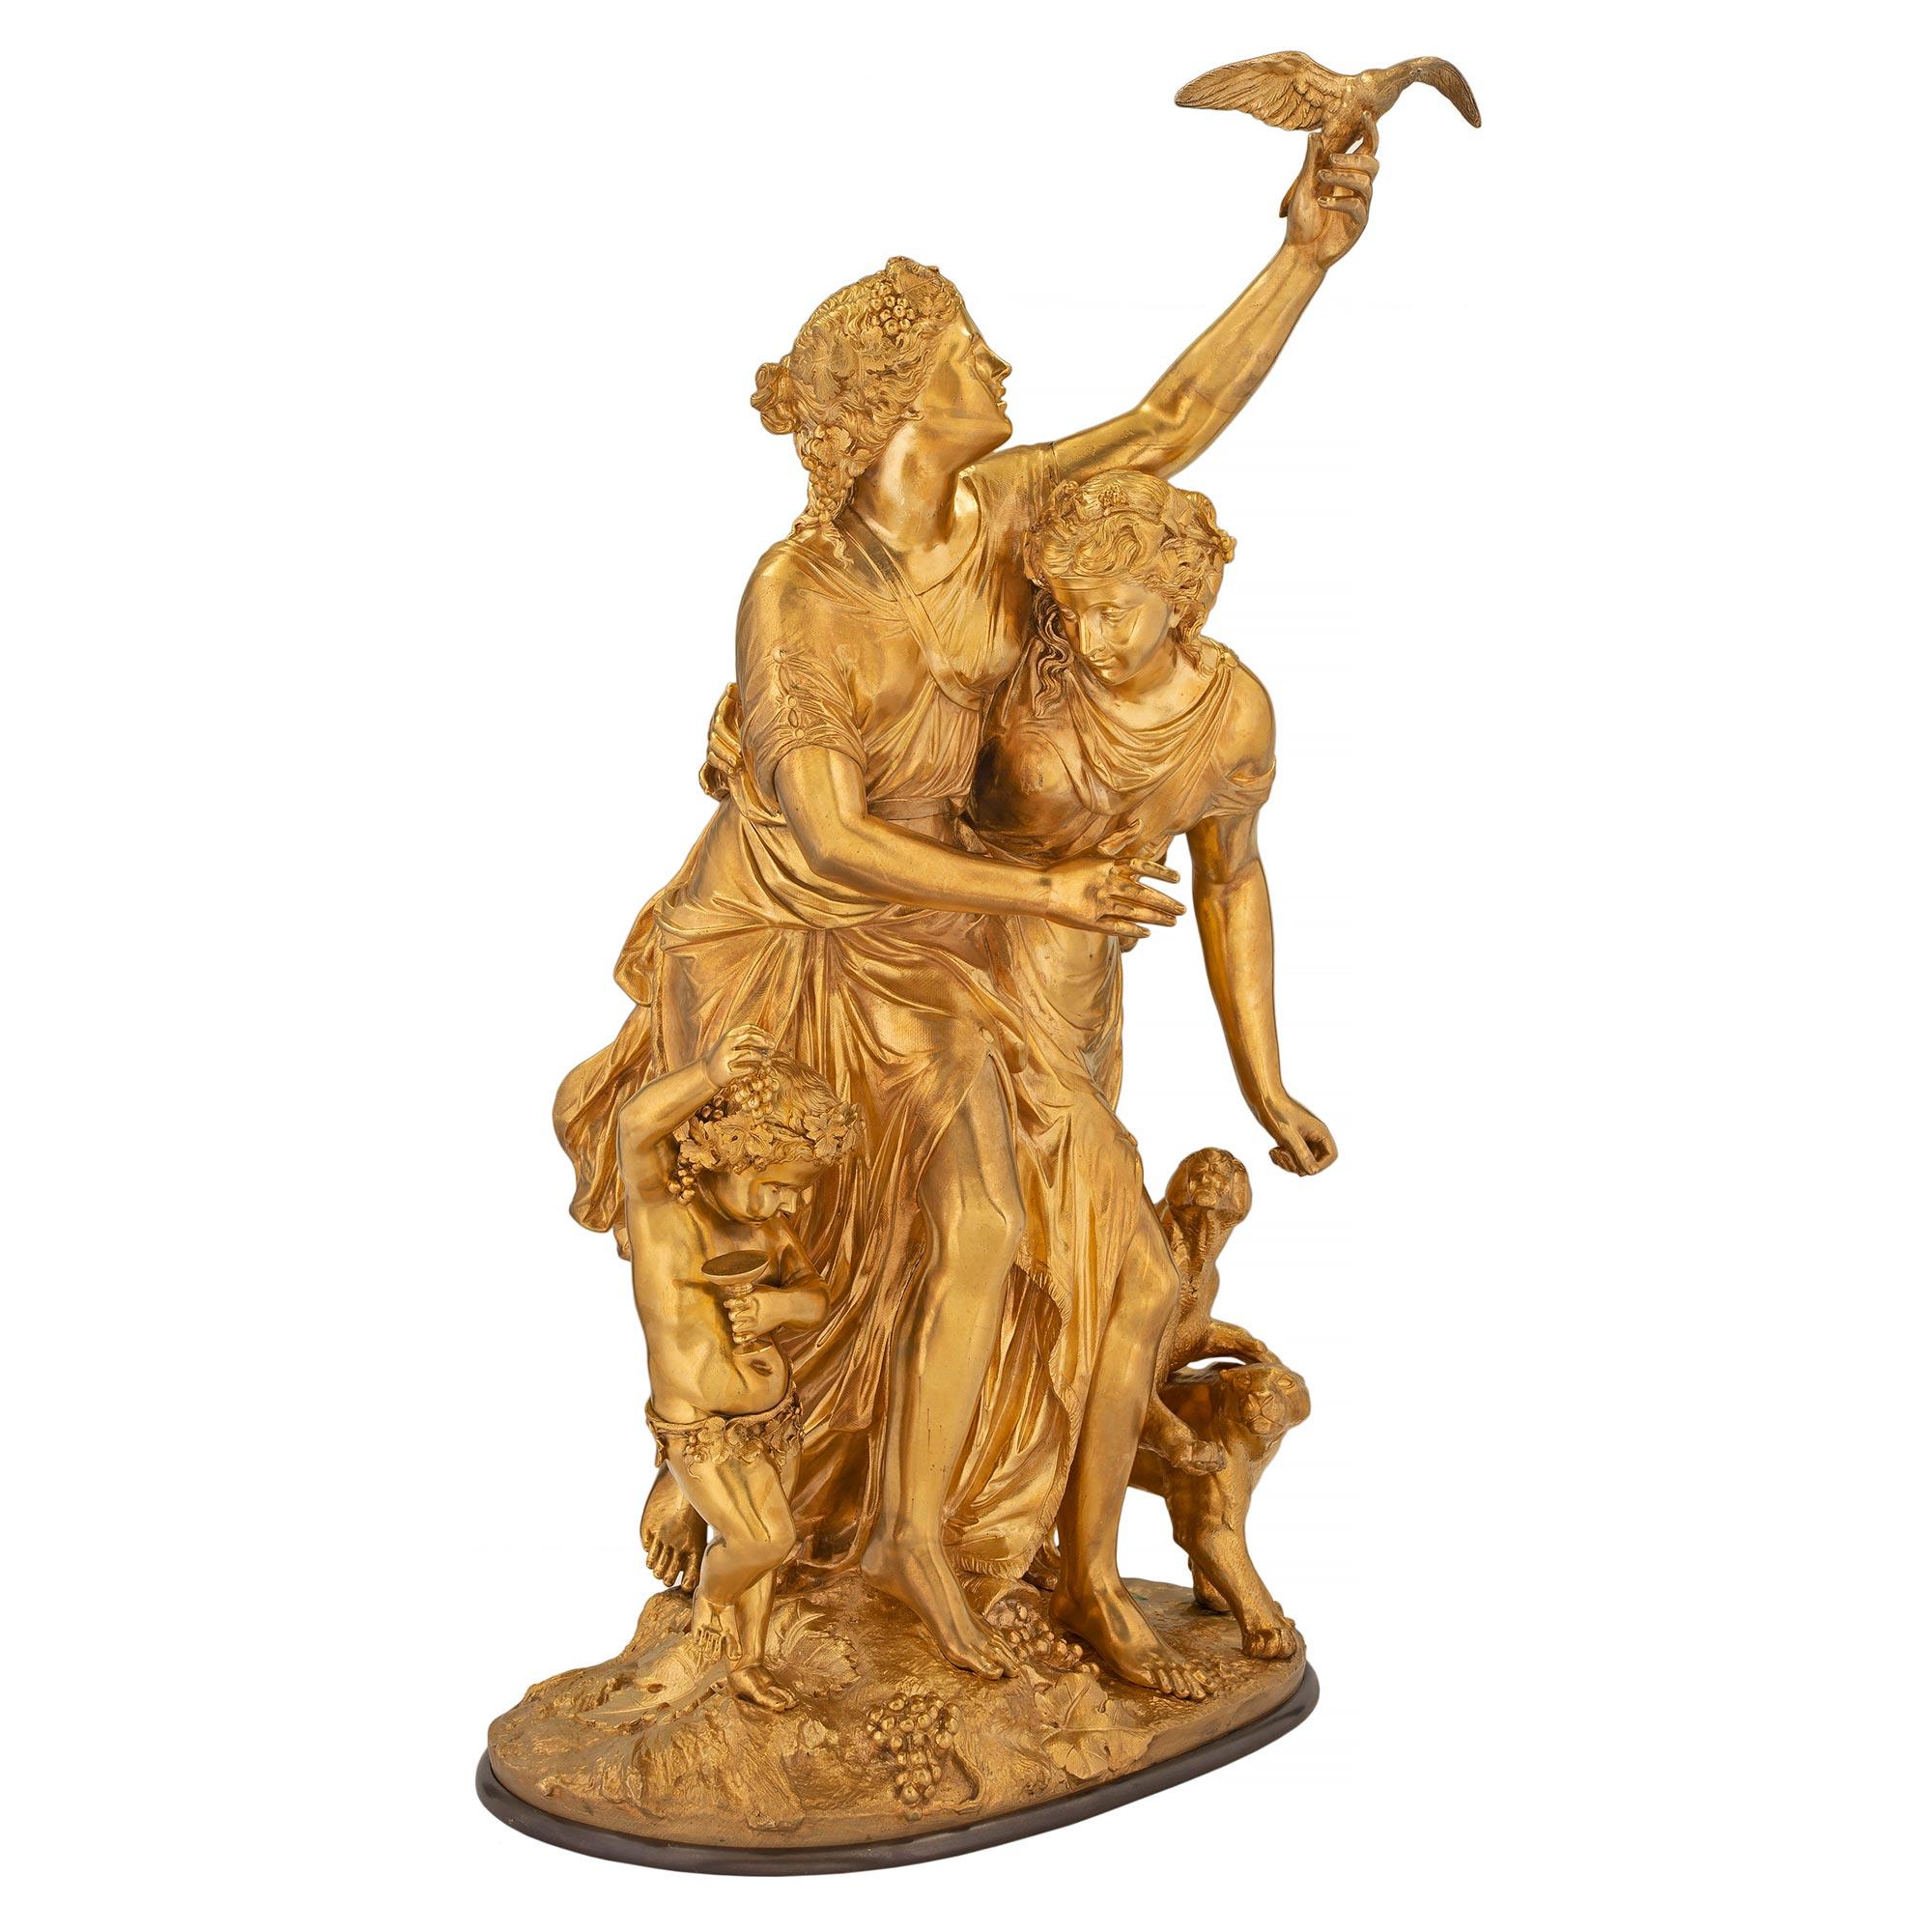 An attractive and richly detailed French mid 19th century Louis XVI st. ormolu and patinated bronze signed Delesalle statue. The statue with an oval patinated bronze base has two female maidens in classical dress. One of the maidens has her hand in